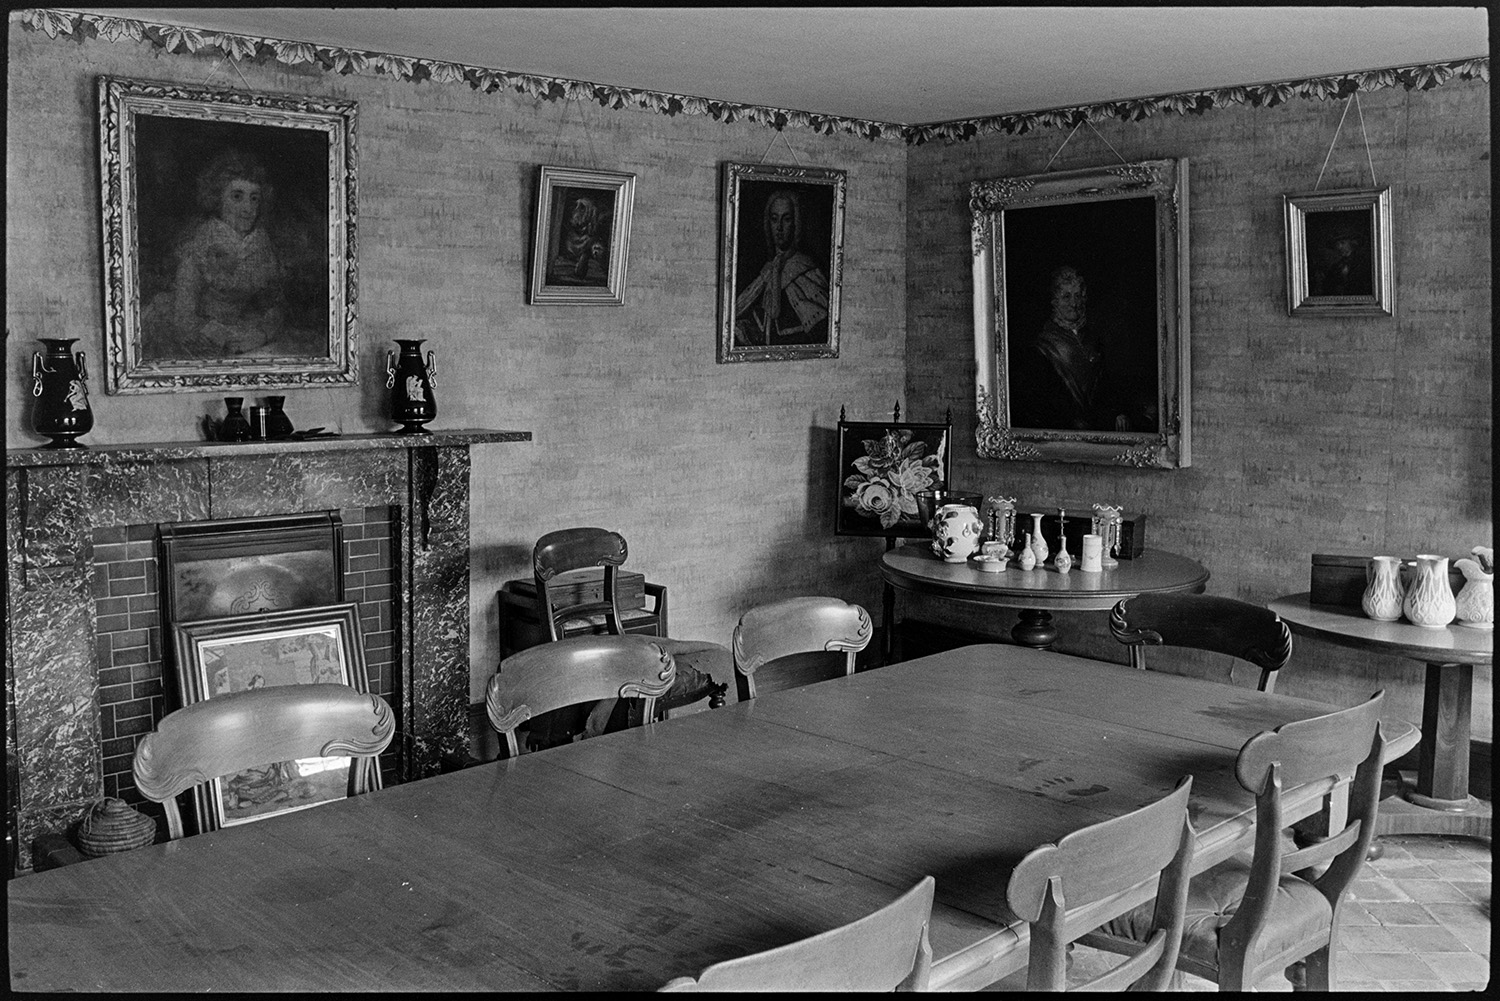 Dining room of large farmhouse. Furniture, table, chairs, china, pictures. 
[The dining room in the farmhouse at Narracott Farm, South Molton. A large table with chairs, a fireplace, side table with jugs and pictures hung on the wall are visible.]